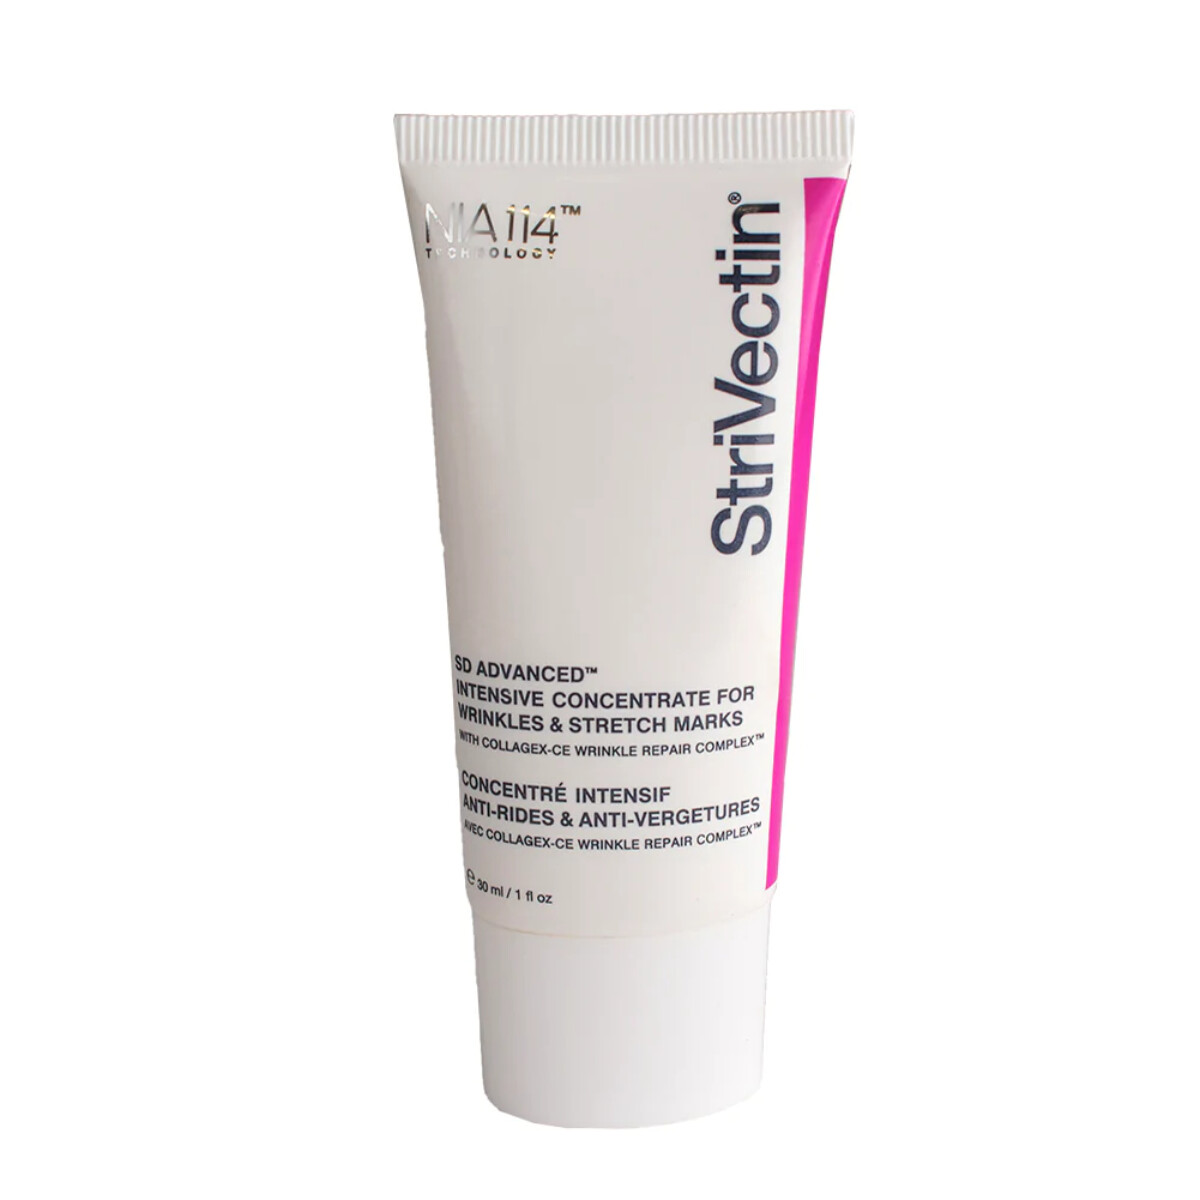 Strivectin SD Advanced Intensive Concentrate For Wrinkles & Stretch Mark (1oz)